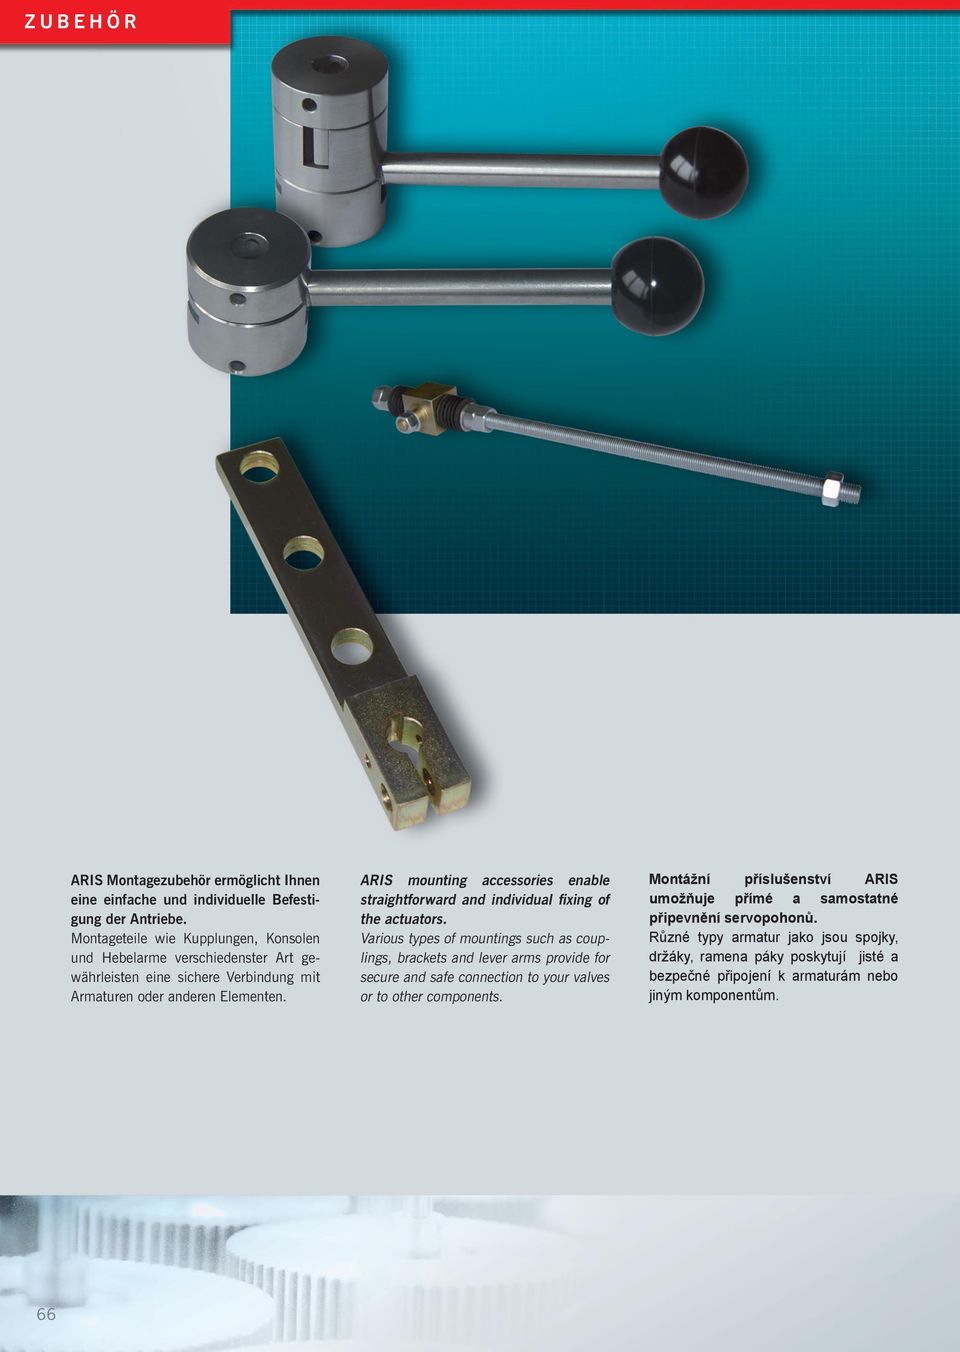 ARIS mounting accessories enable straightforward and individual fixing of the actuators.